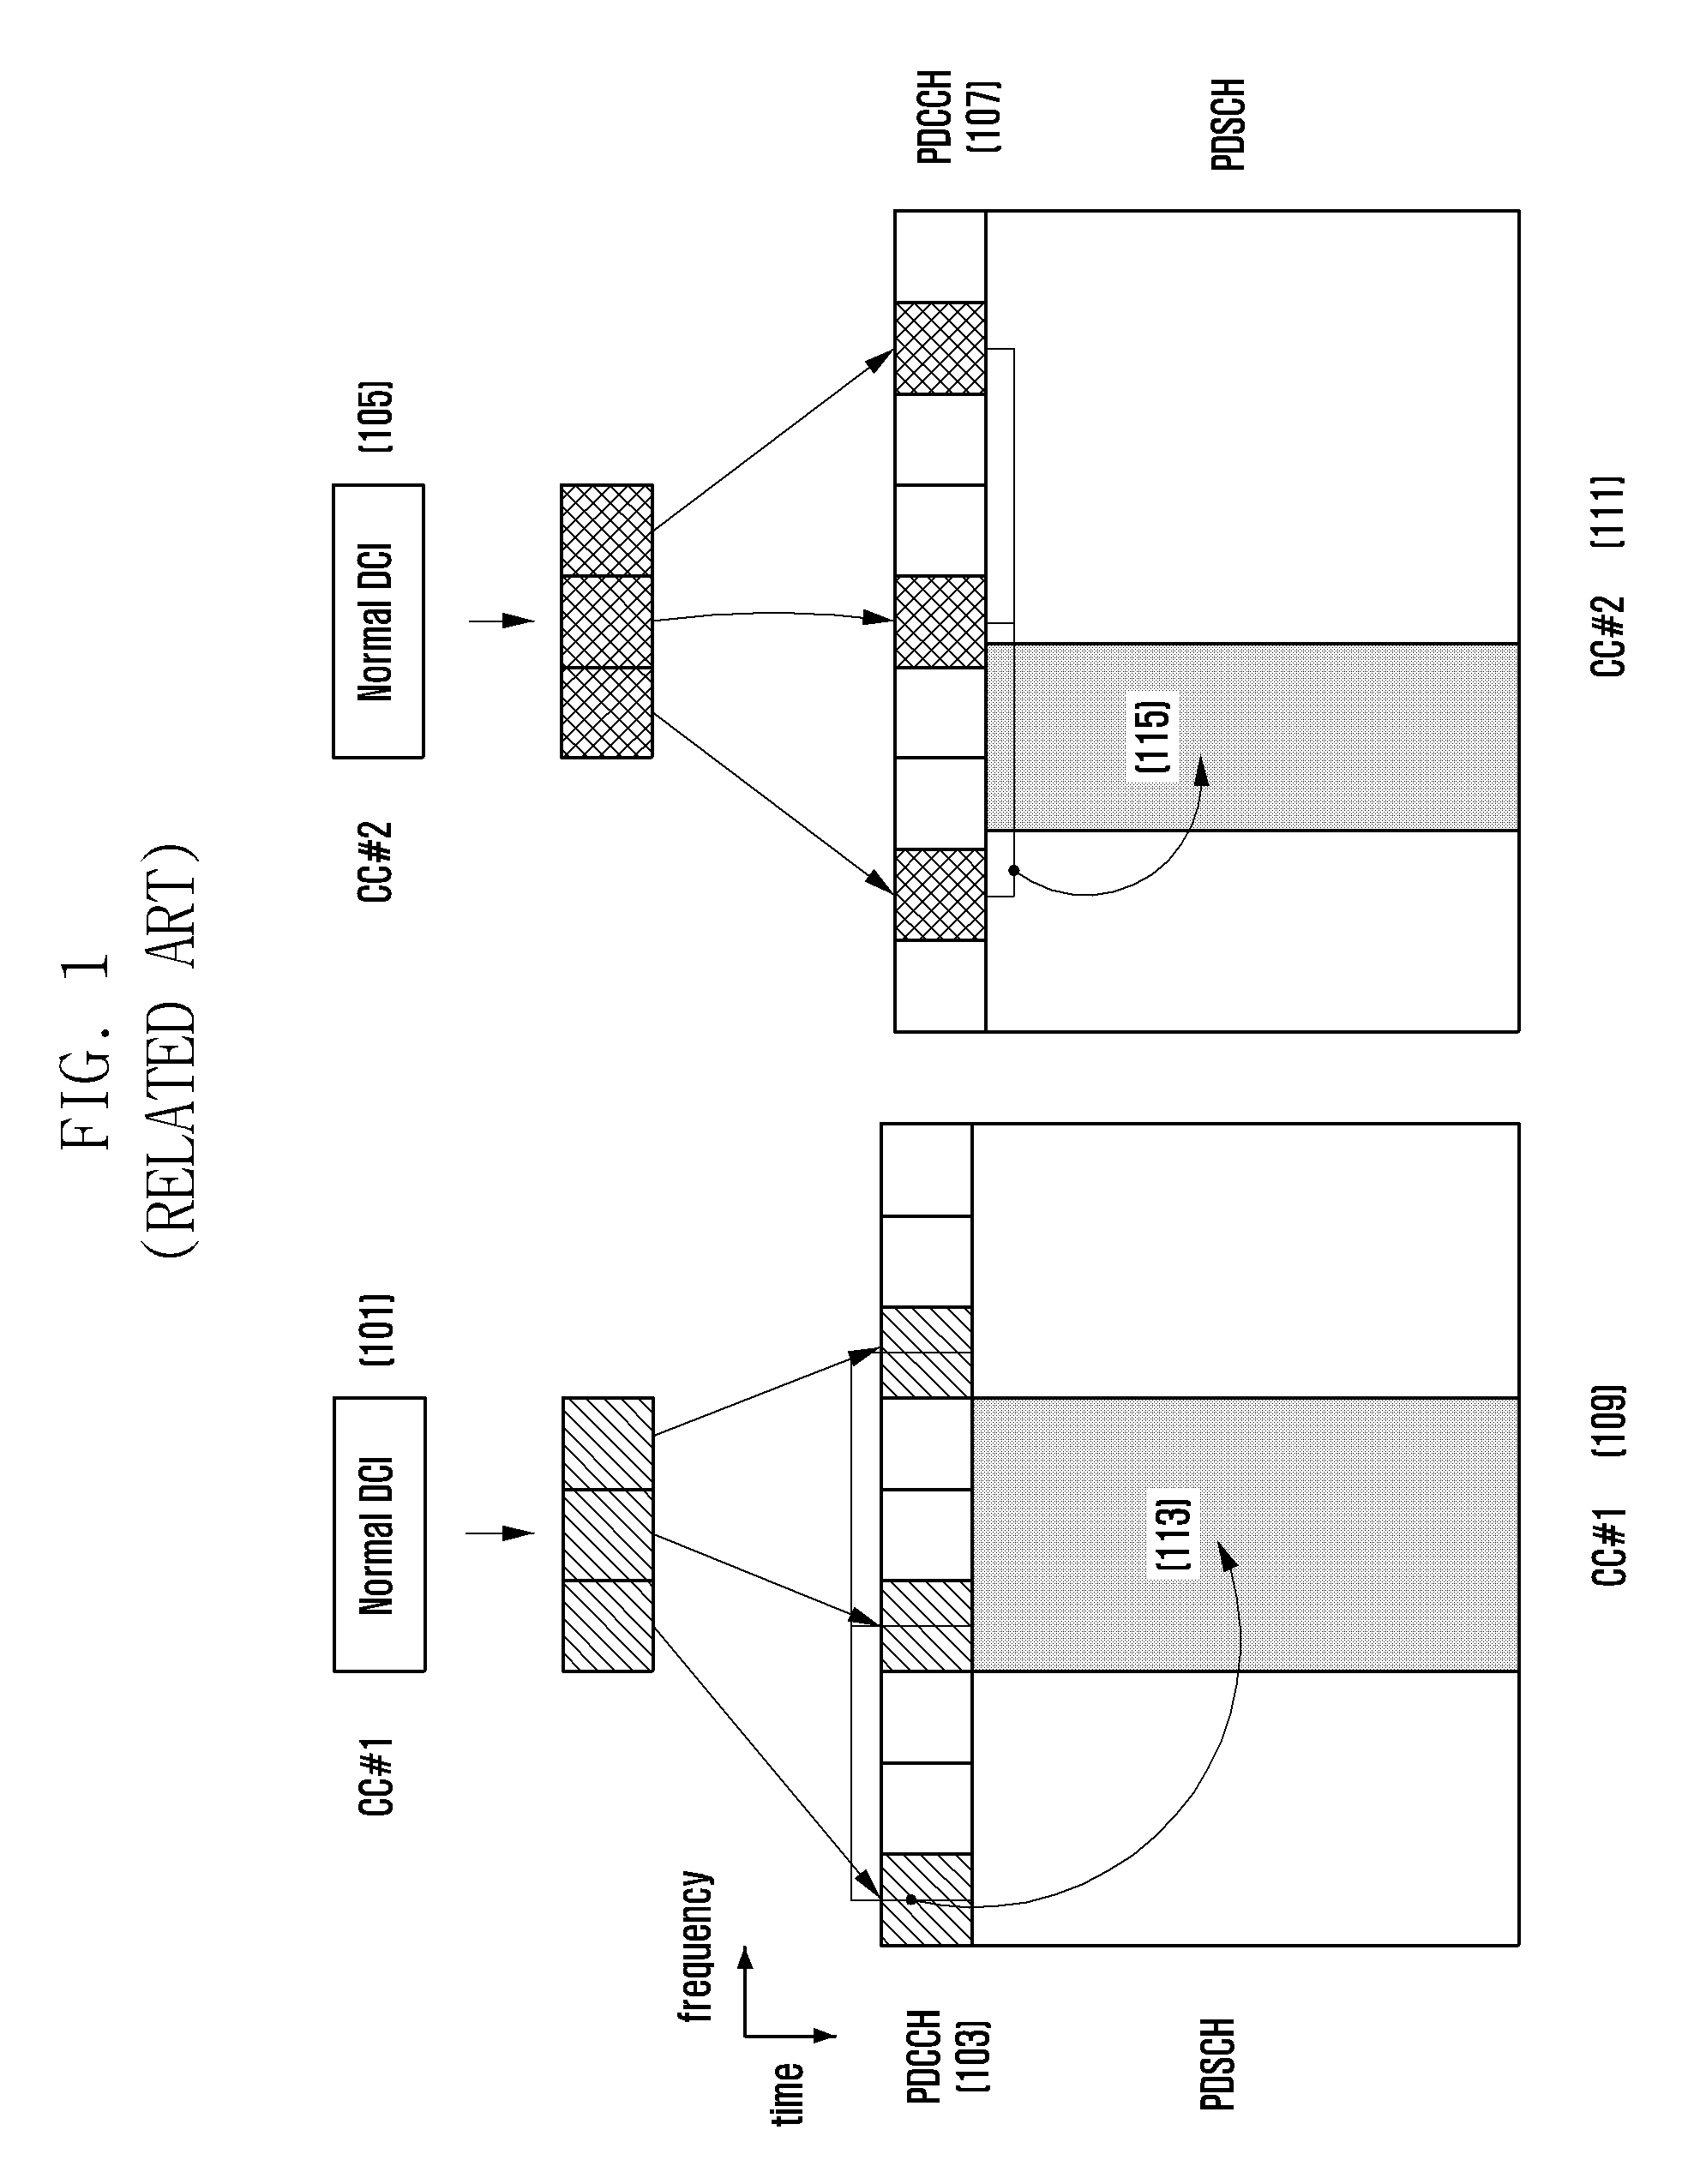 Apparatus and method for defining physical channel transmit/receive timings and resource allocation in TDD communication system supporting carrier aggregation